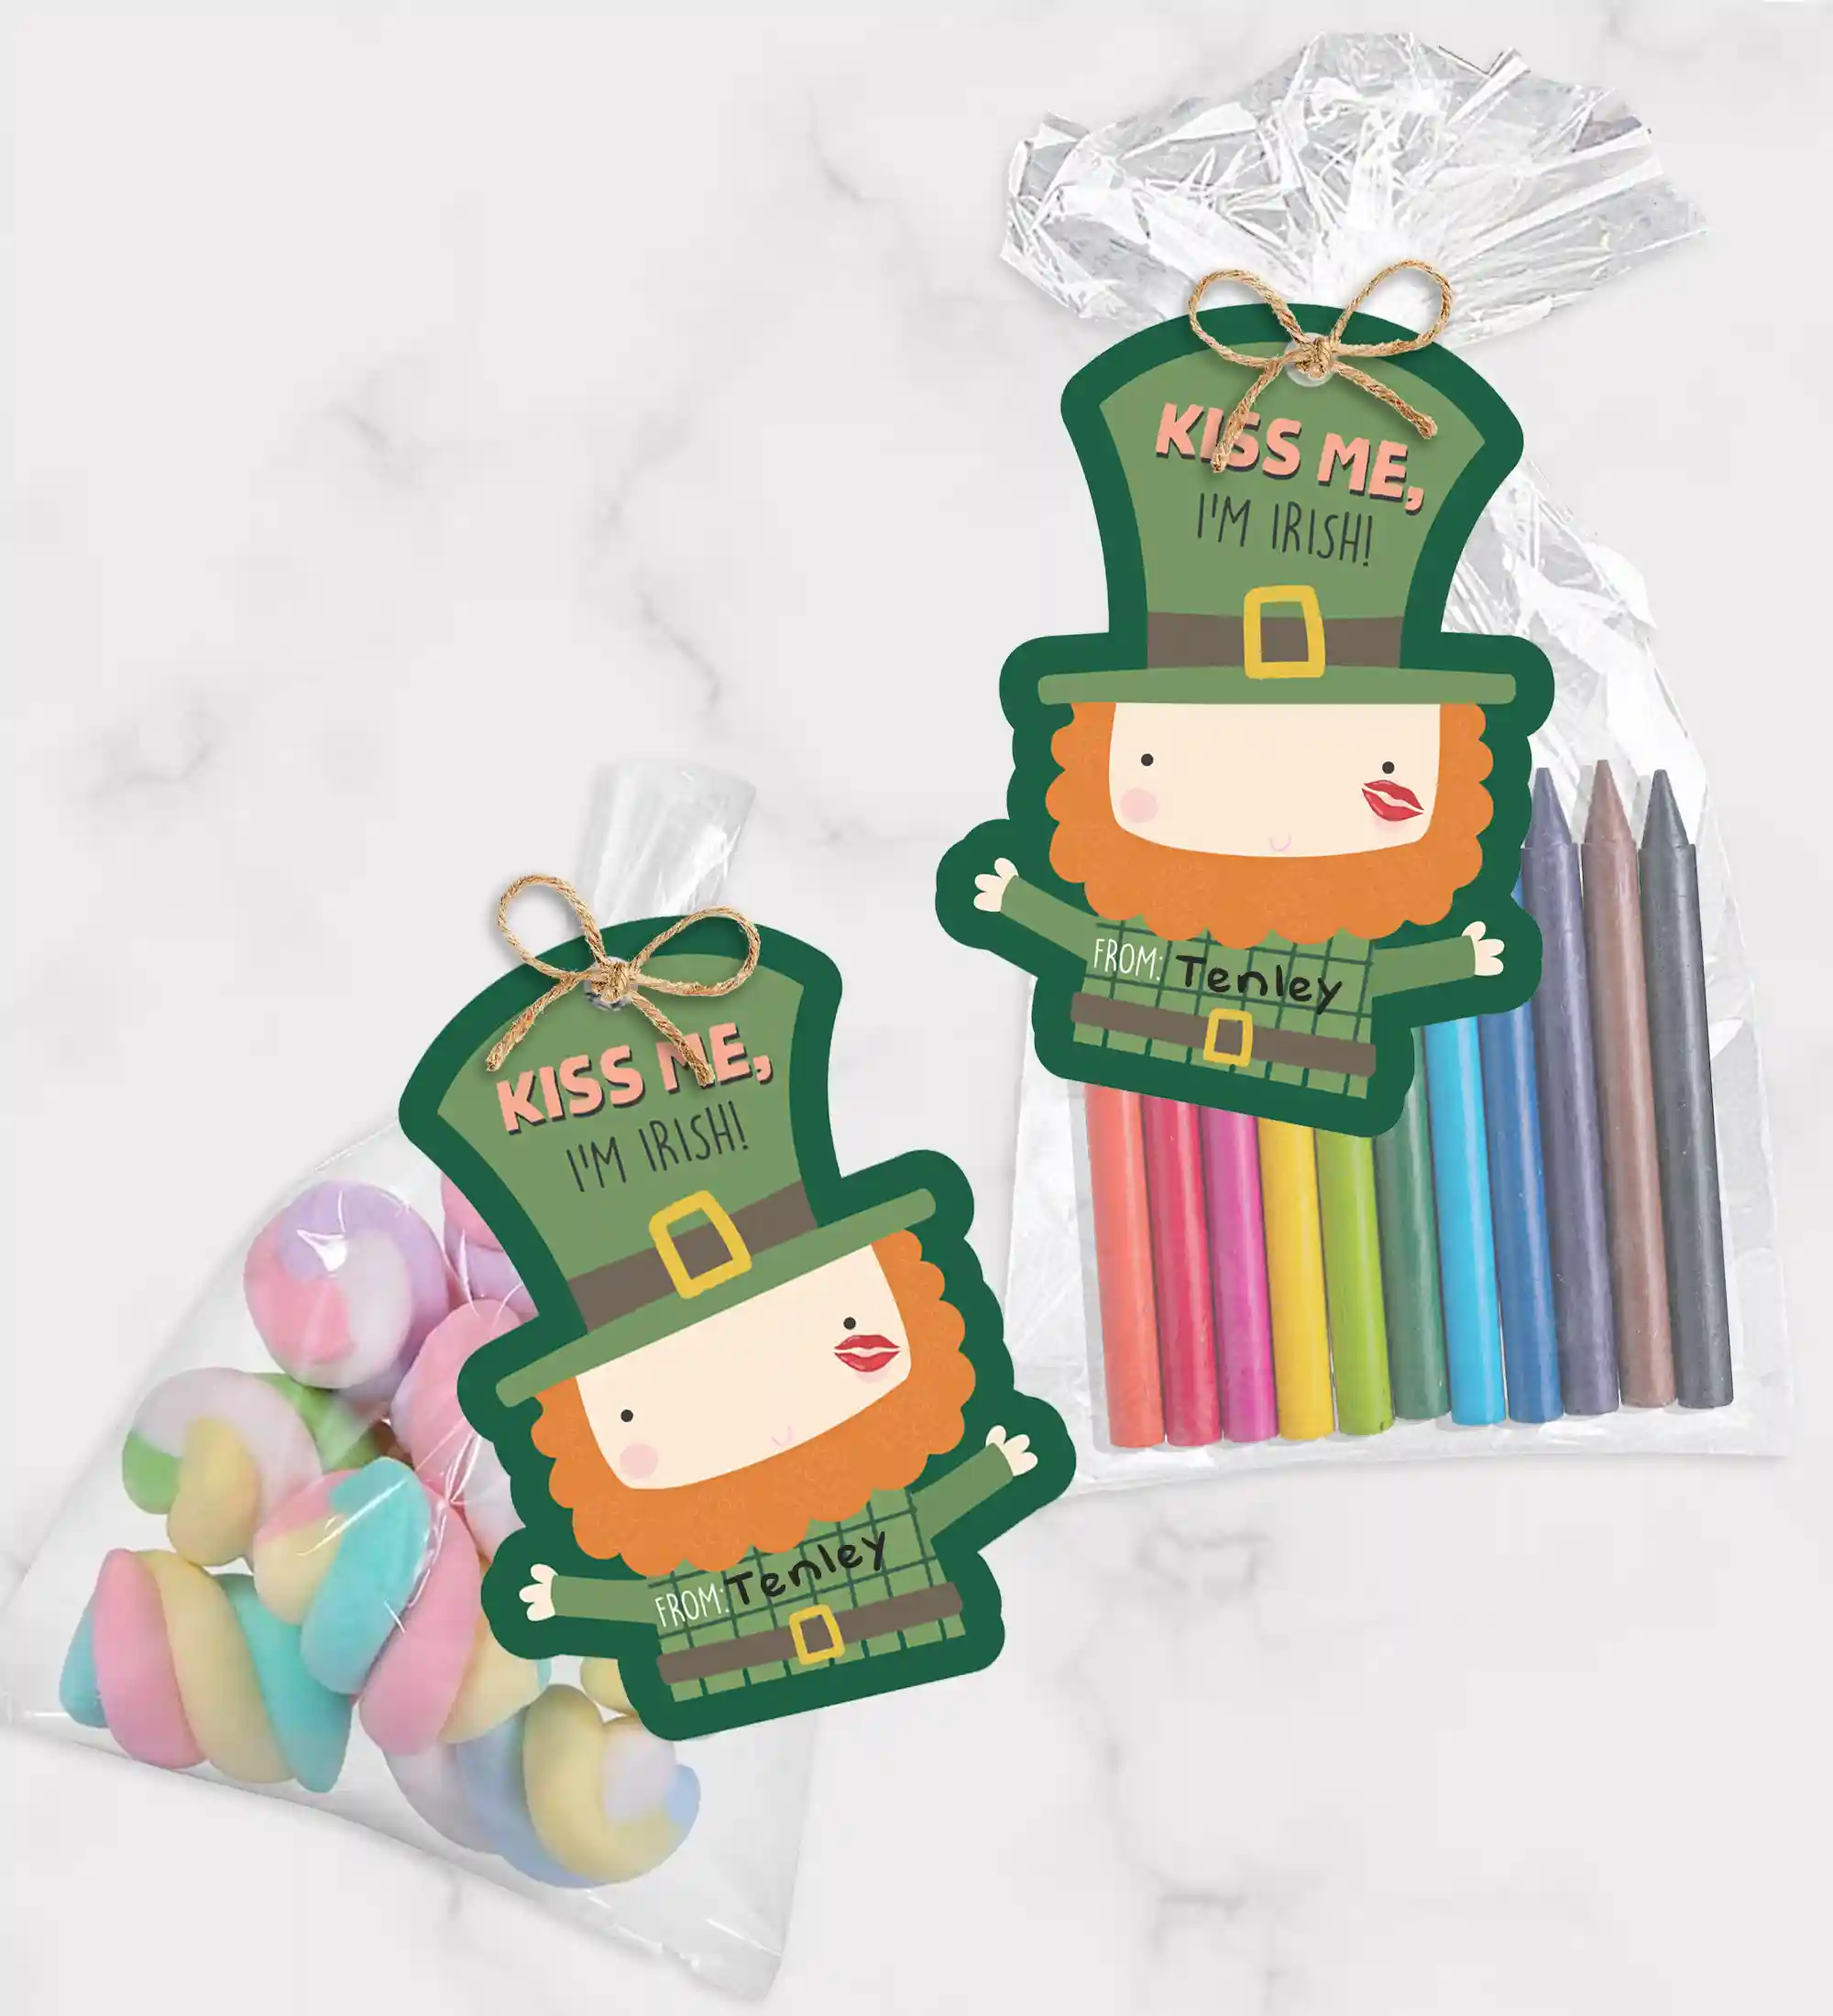 Printable St. Patrick's Day gift tag for a fun and easy gift for St. Patrick's Day. Gfit tag says: "Kiss me, I'm Irish!" Attach gift tag to a small bag of St. Patrick's Day treats like M&Ms, skittles, chocolate gold coins, Hershey's kisses or St. Patrick's Day toys and gifts like playdough, crayons, bubbles.